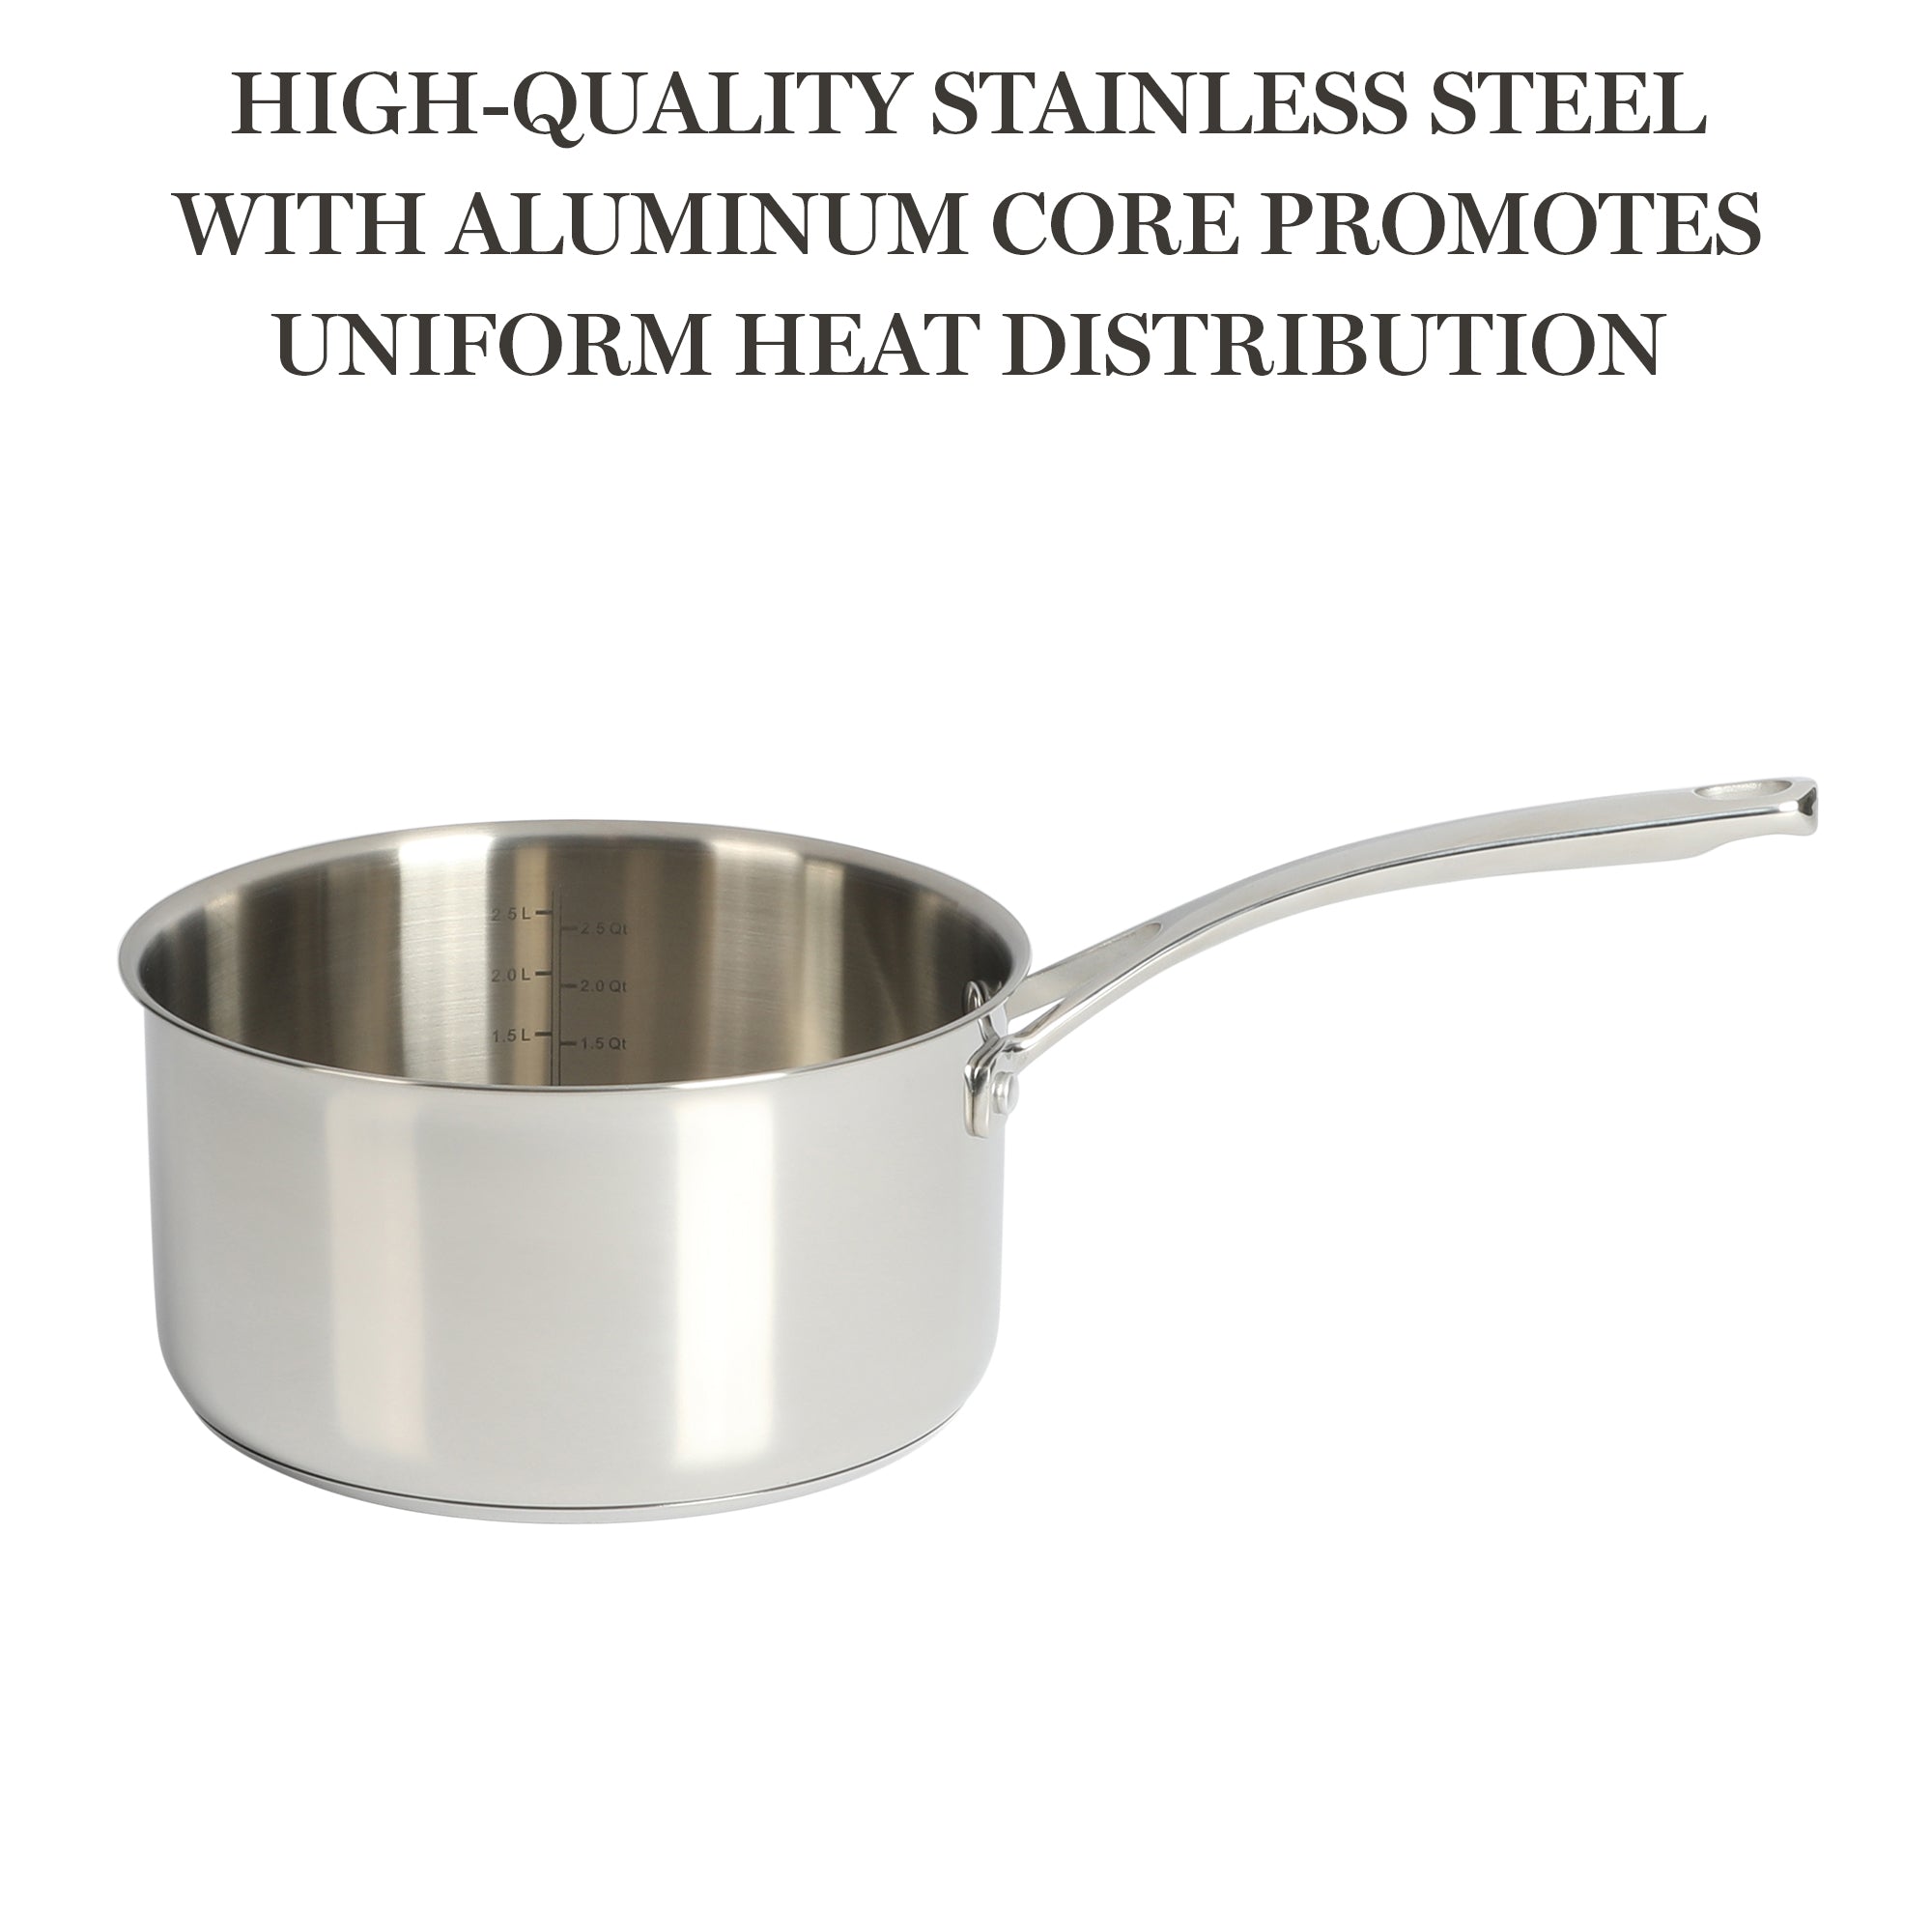 Stainless Steel Pro 3.5 Qt Sauce Pan + Cover